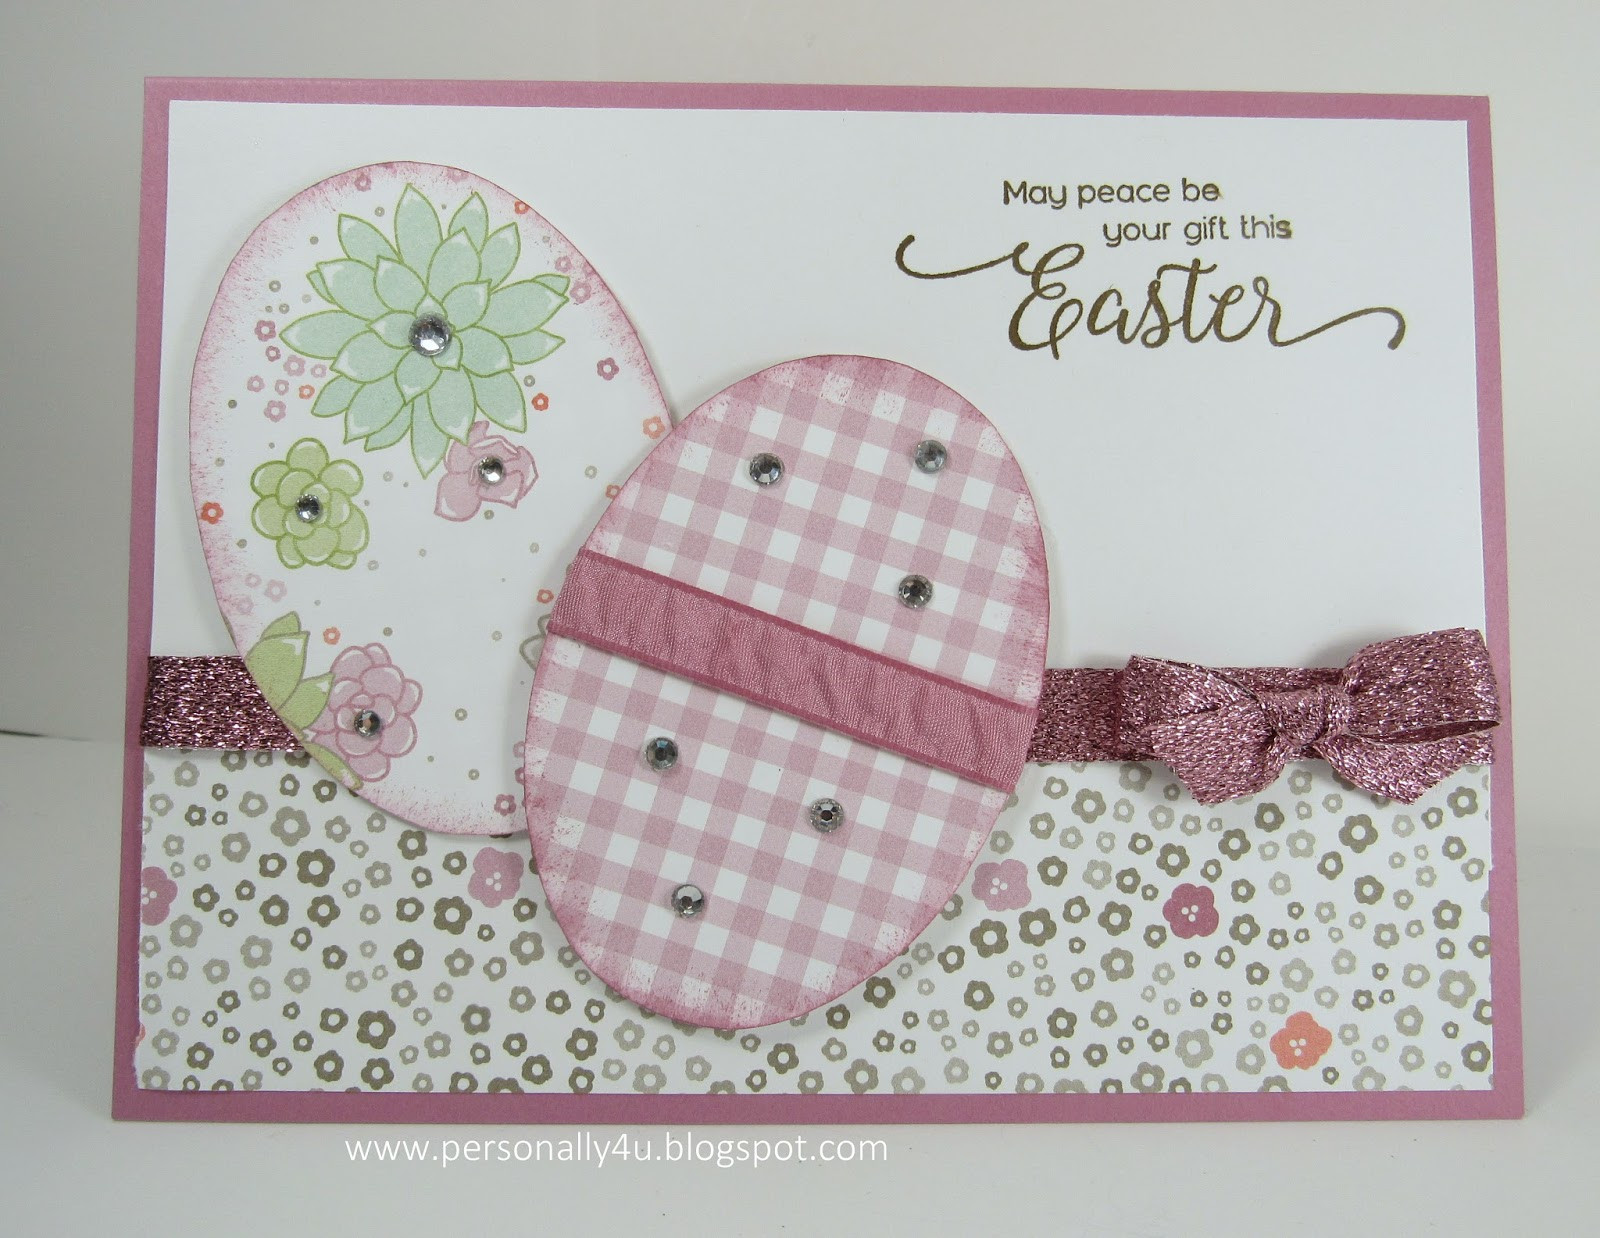 Stampin Up Easter Cards Ideas
 Personally Yours Stampin Up Easter Cards